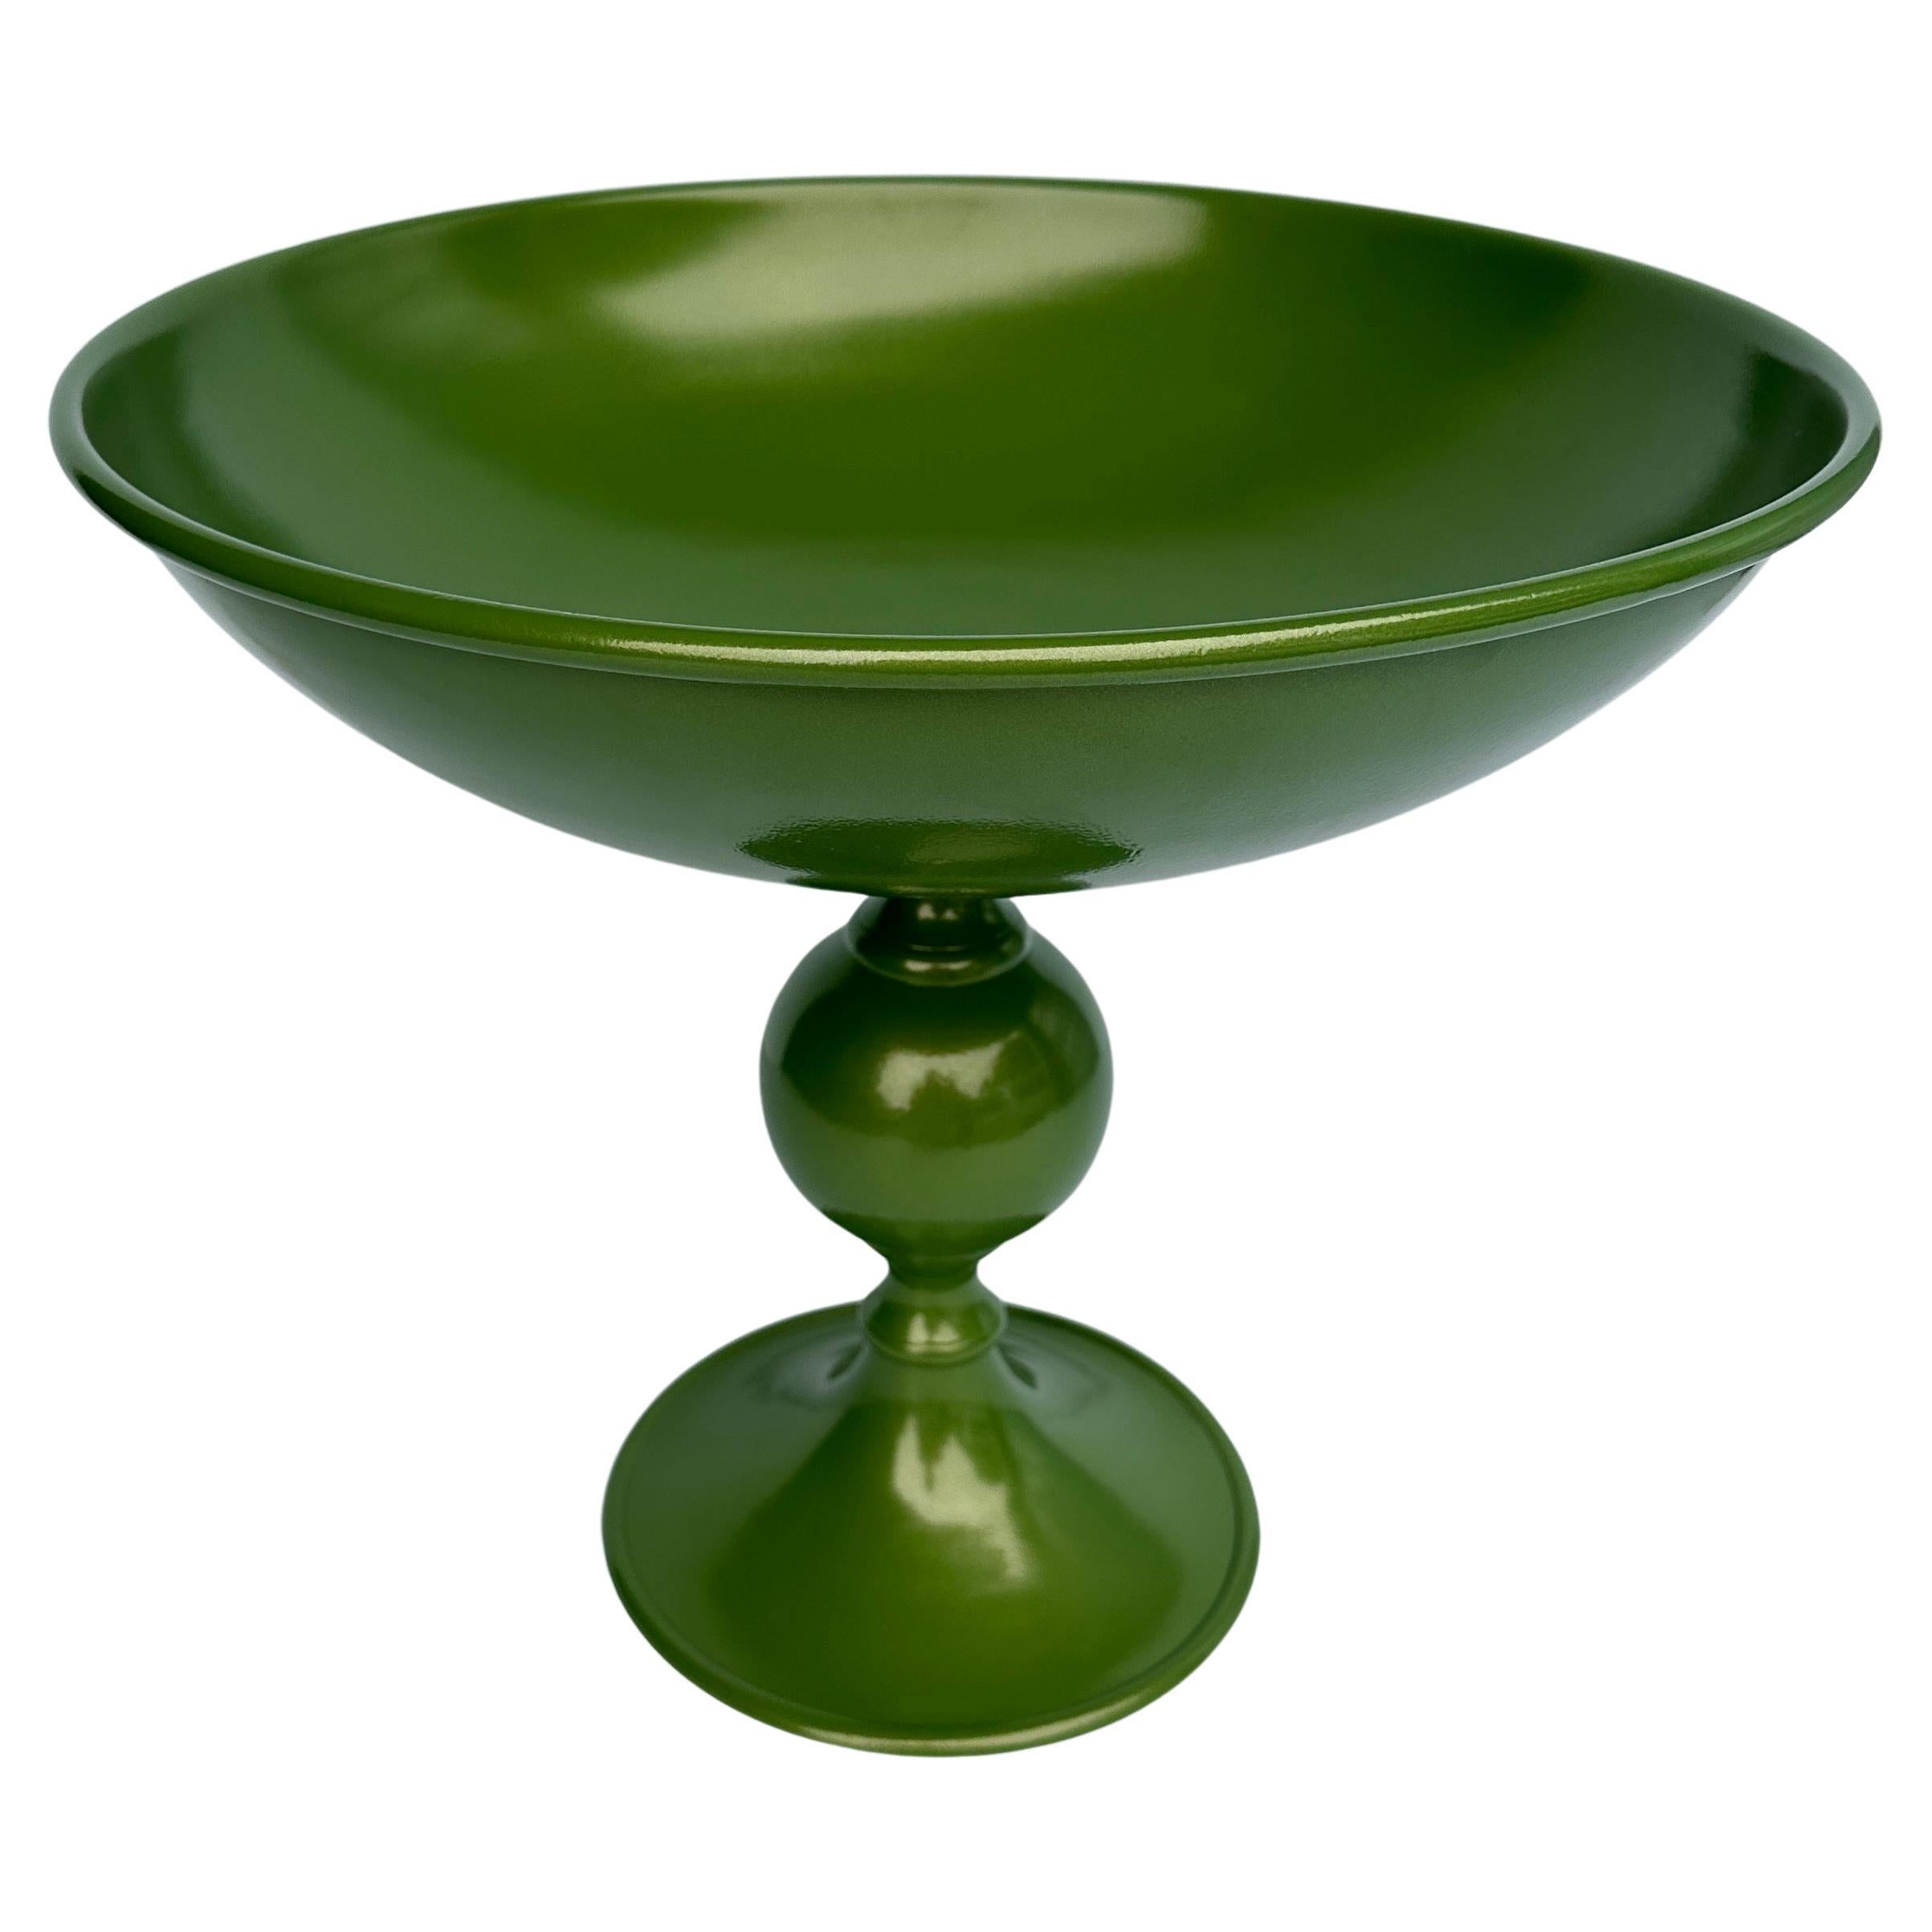 Silverplate Centerpiece Bowl in Newly Powder-Coated Green 

This very sturdy centerpiece bowl is now one of a kind, since we recently powder-coated in a leafy green paint that makes it both decorative as well as functional. This vintage and